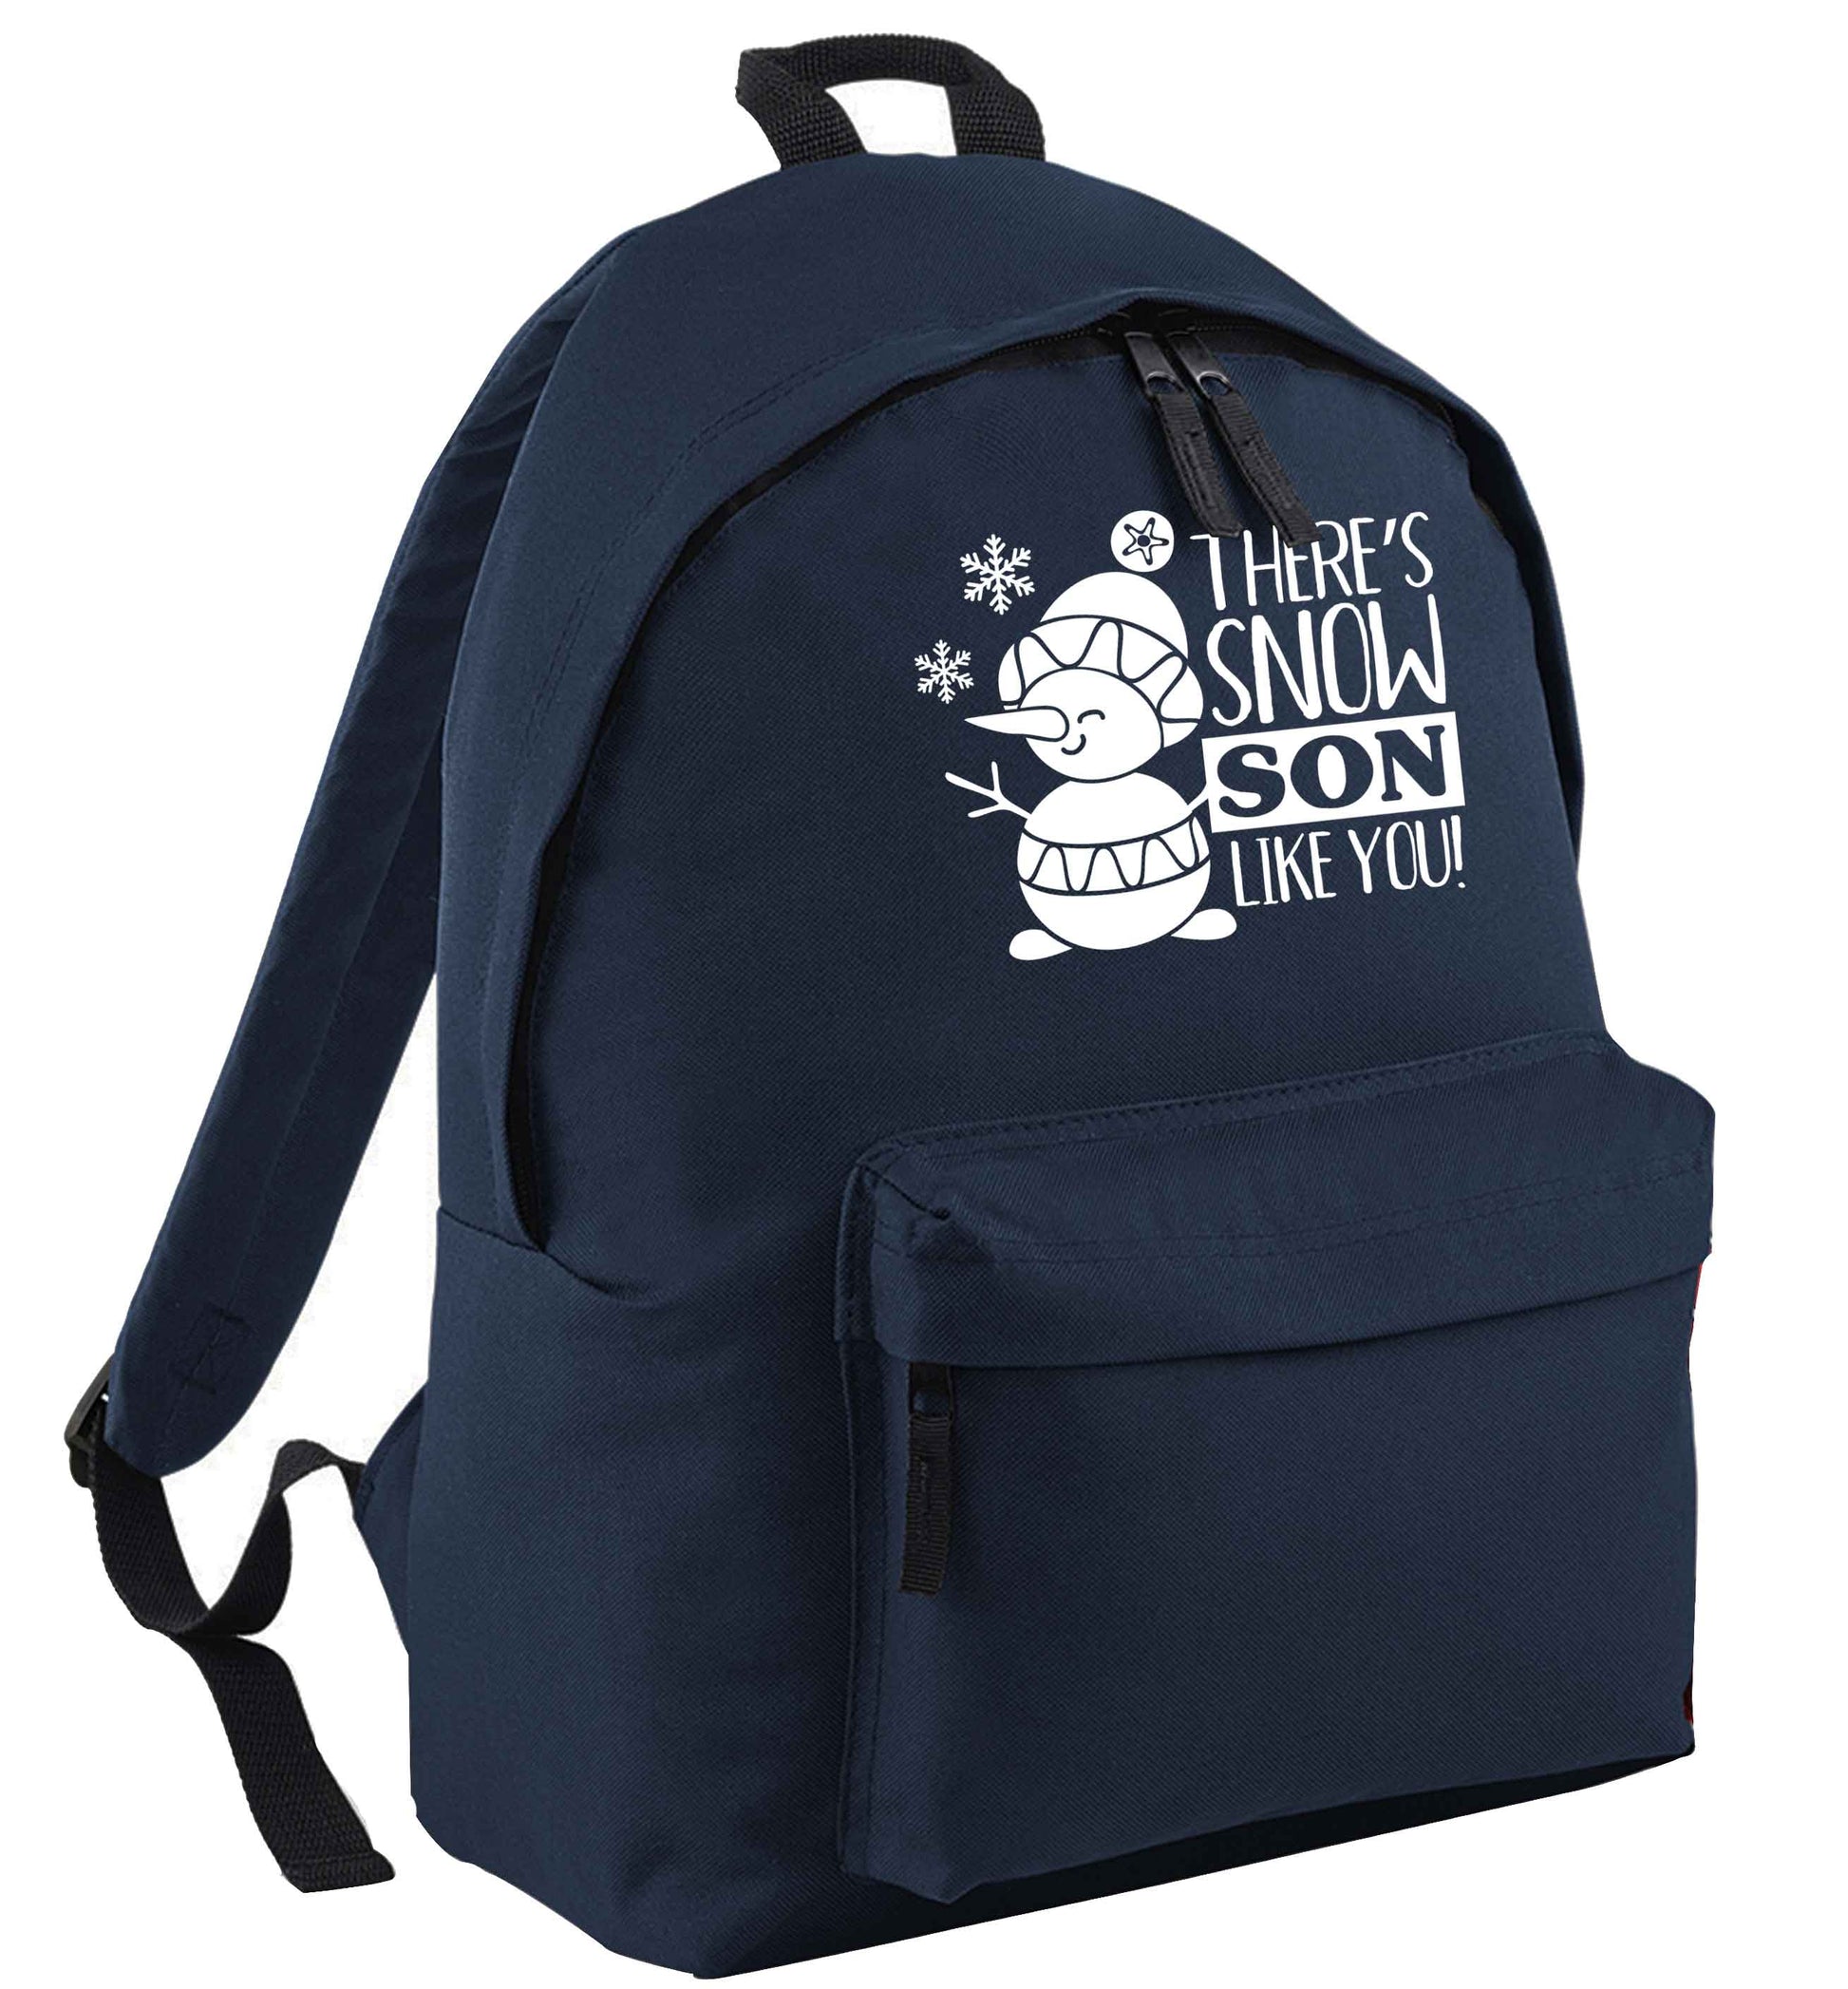 There's snow son like you navy adults backpack